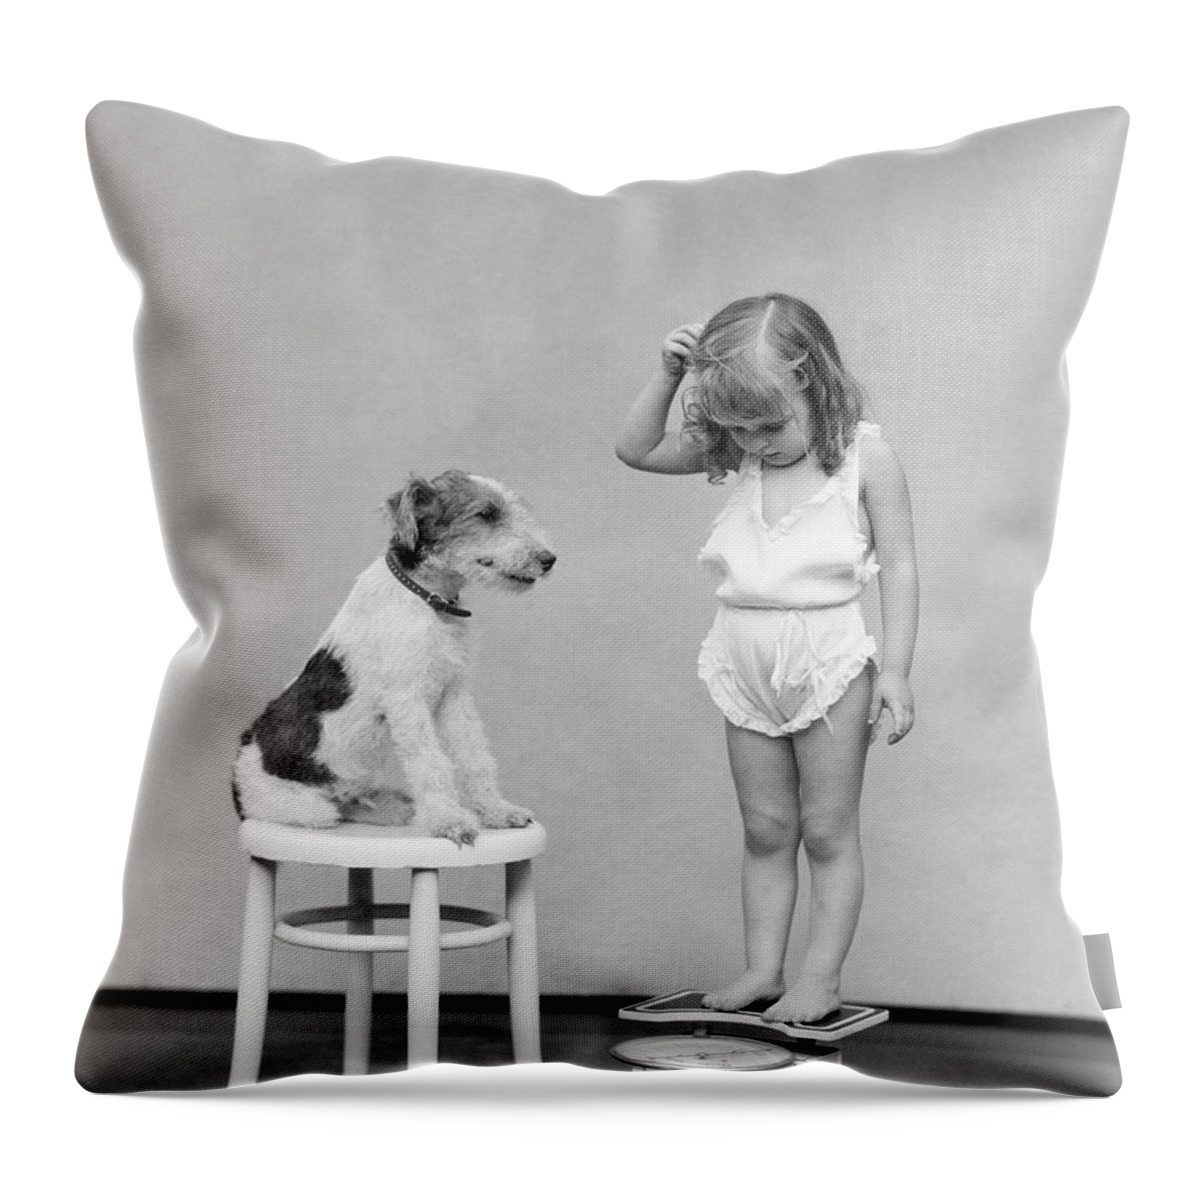 Child Throw Pillow featuring the photograph Girl Standing On Scales, Looking Down by H. Armstrong Roberts